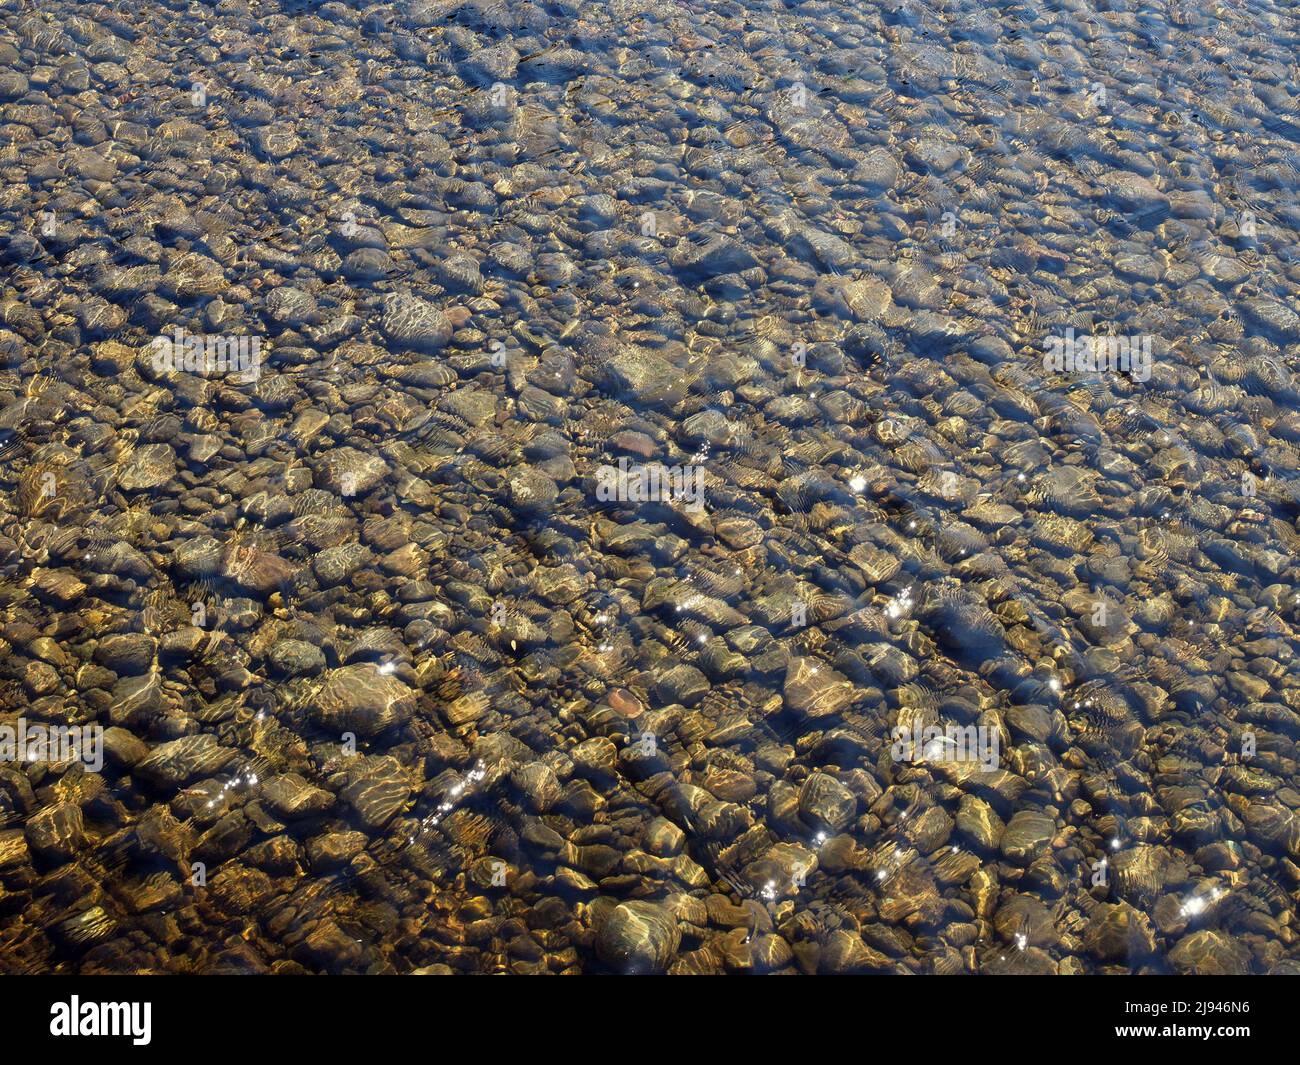 Clear shallow water flowing over river bed of smooth pebbles on a bright sunny day. Stock Photo